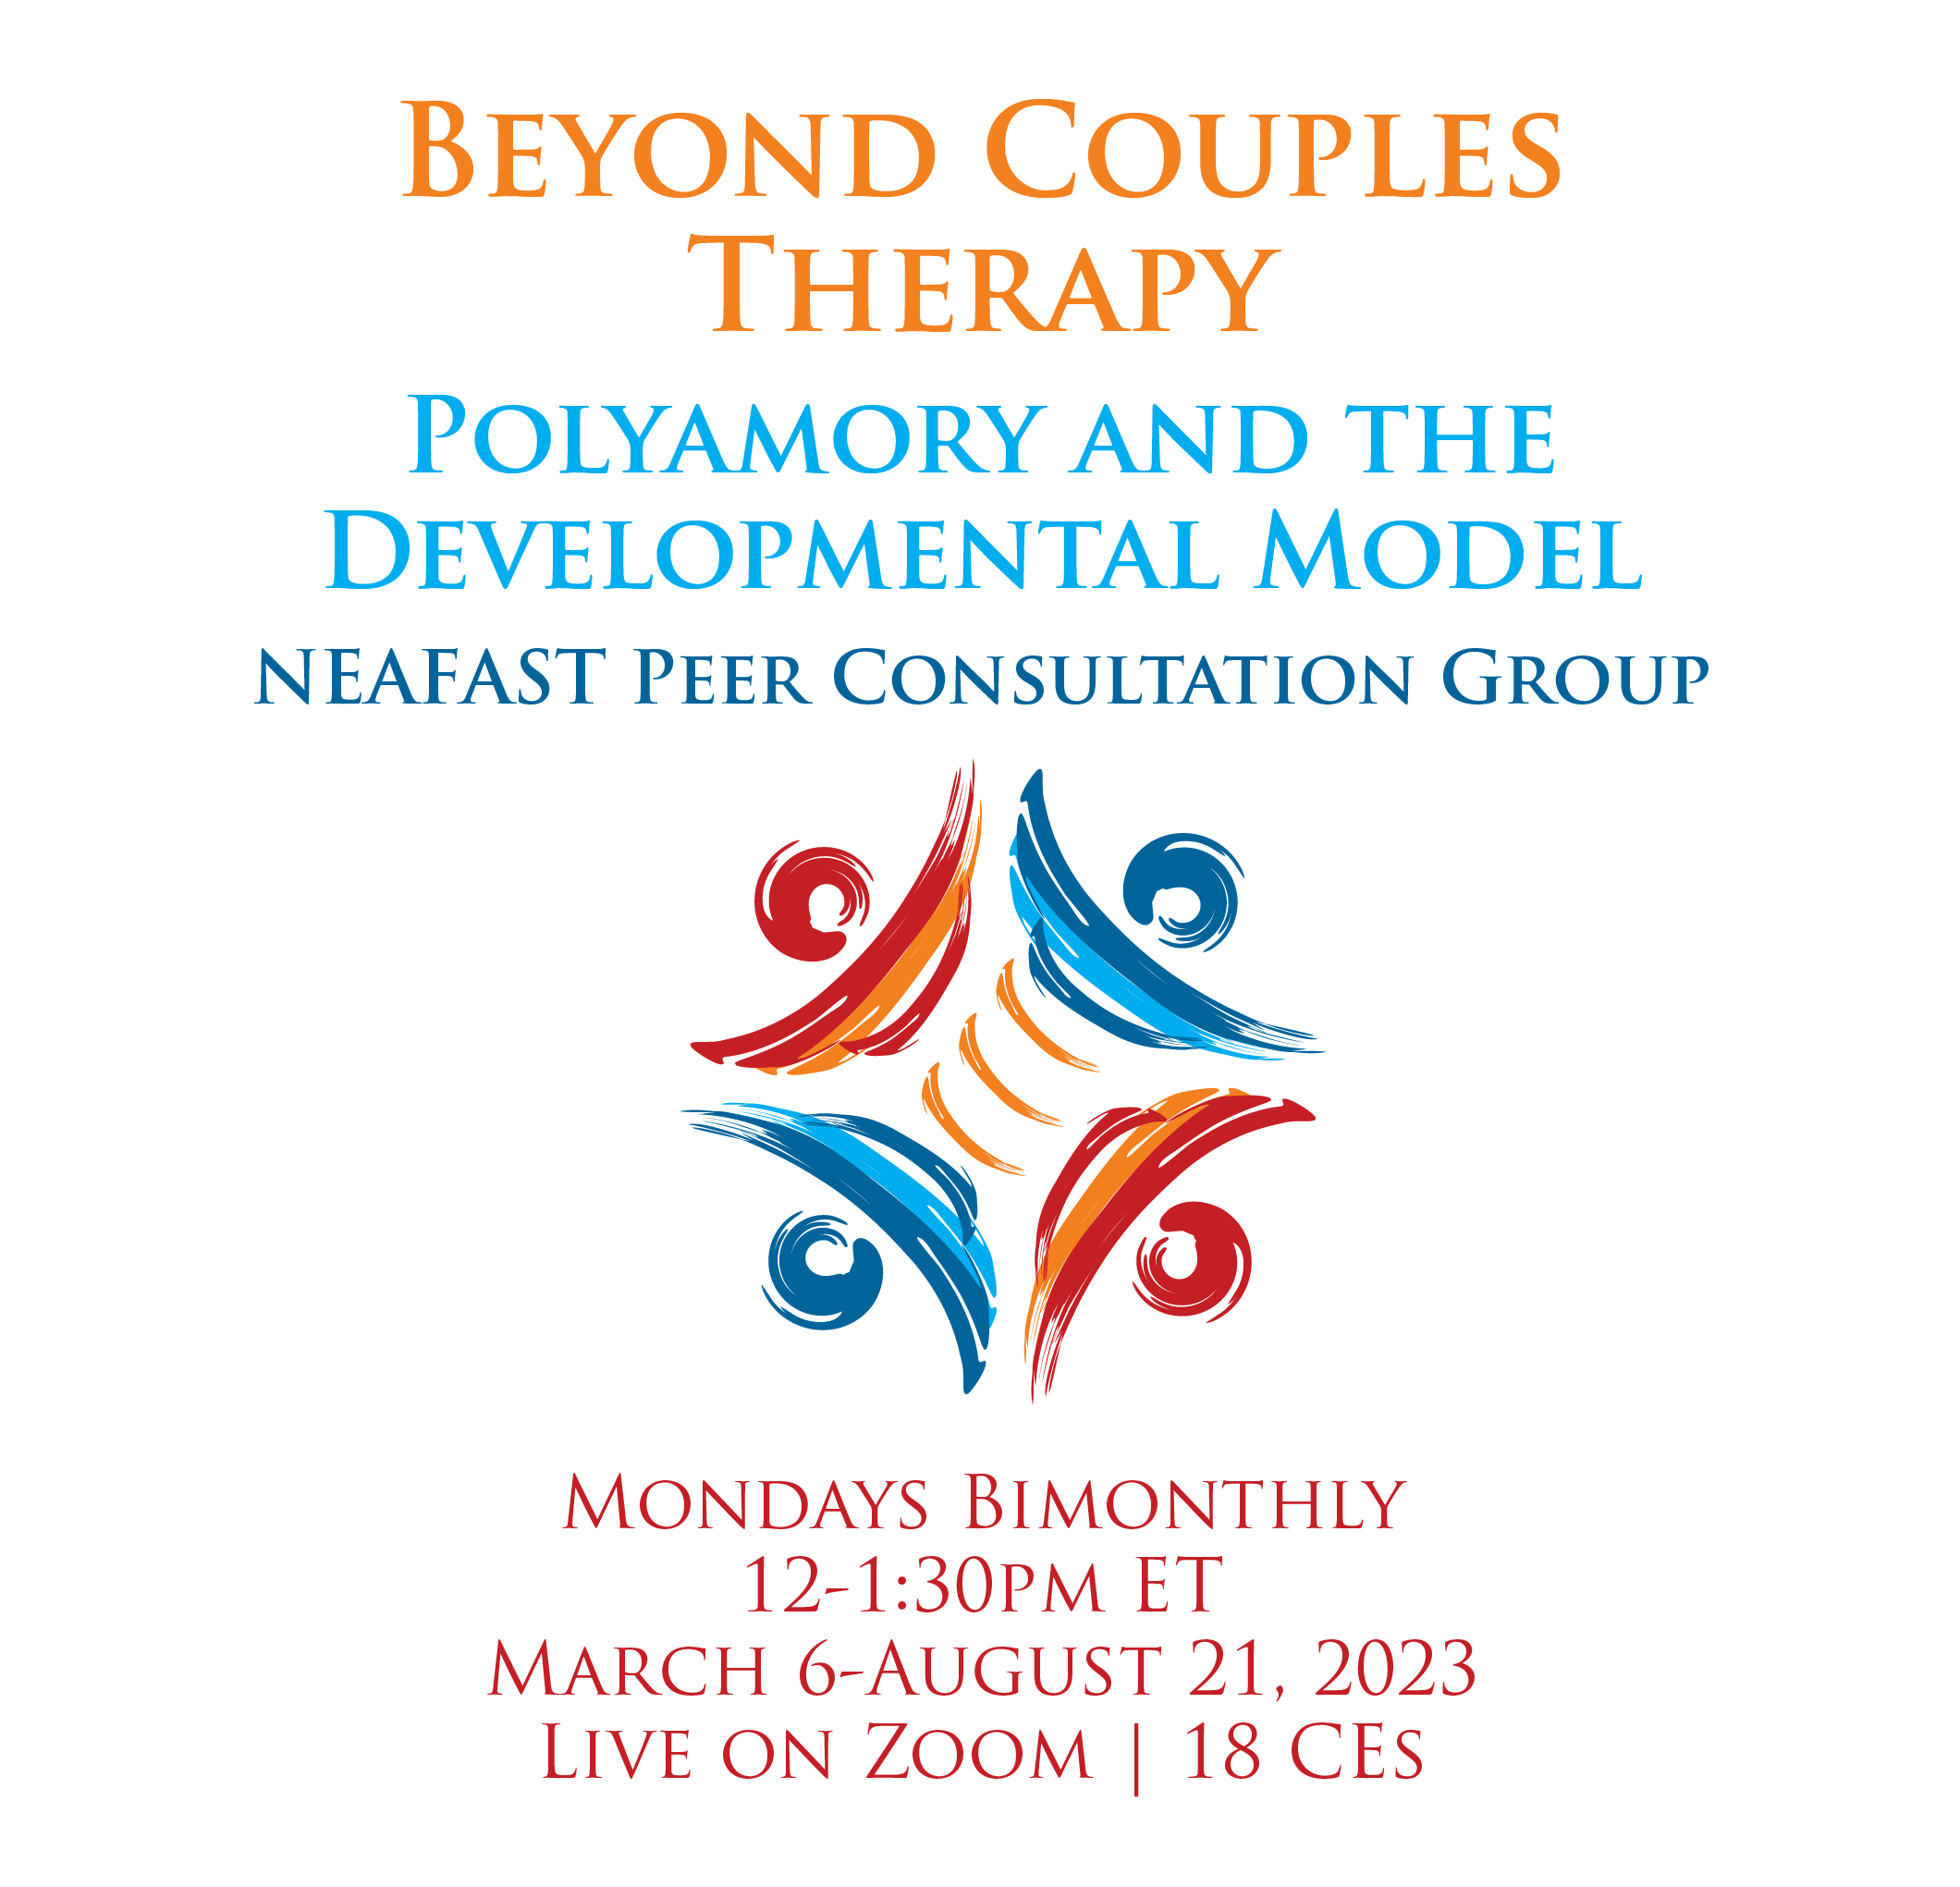 Beyond Couples Therapy Polyamory and the Developmental Model